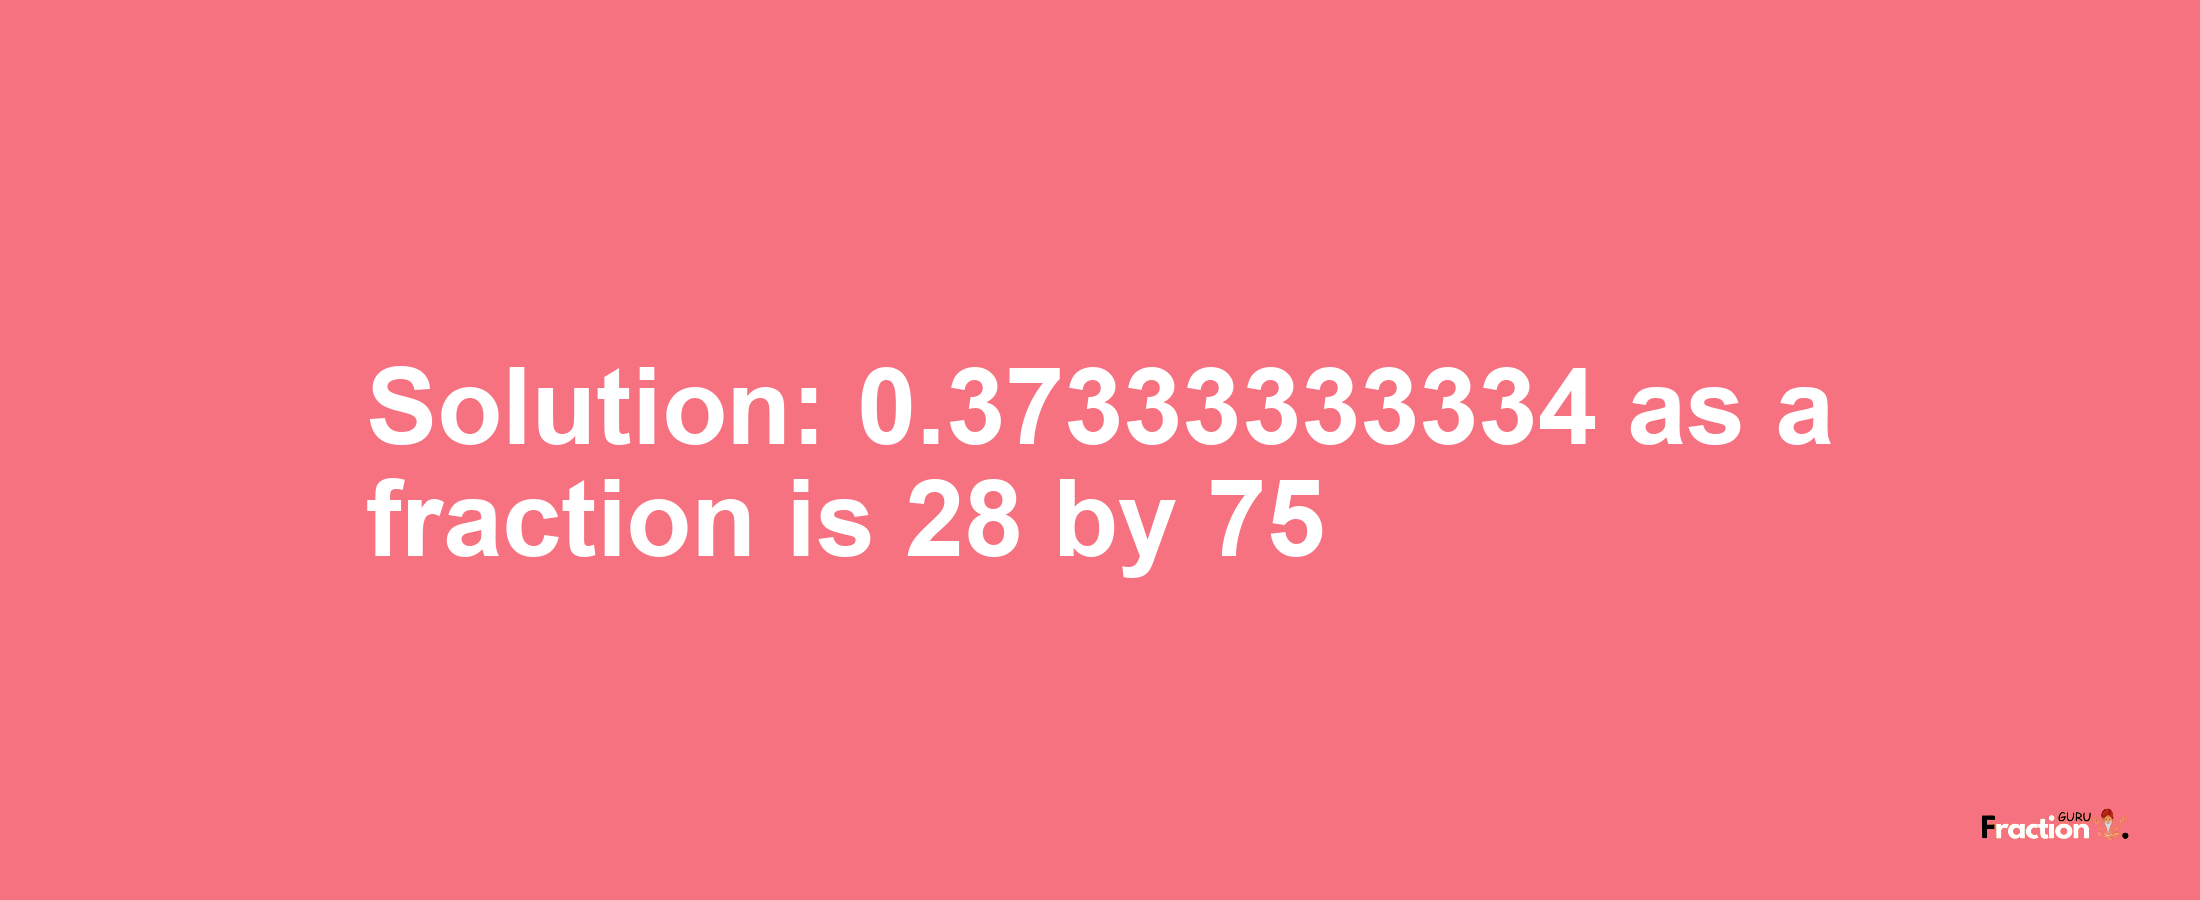 Solution:0.37333333334 as a fraction is 28/75